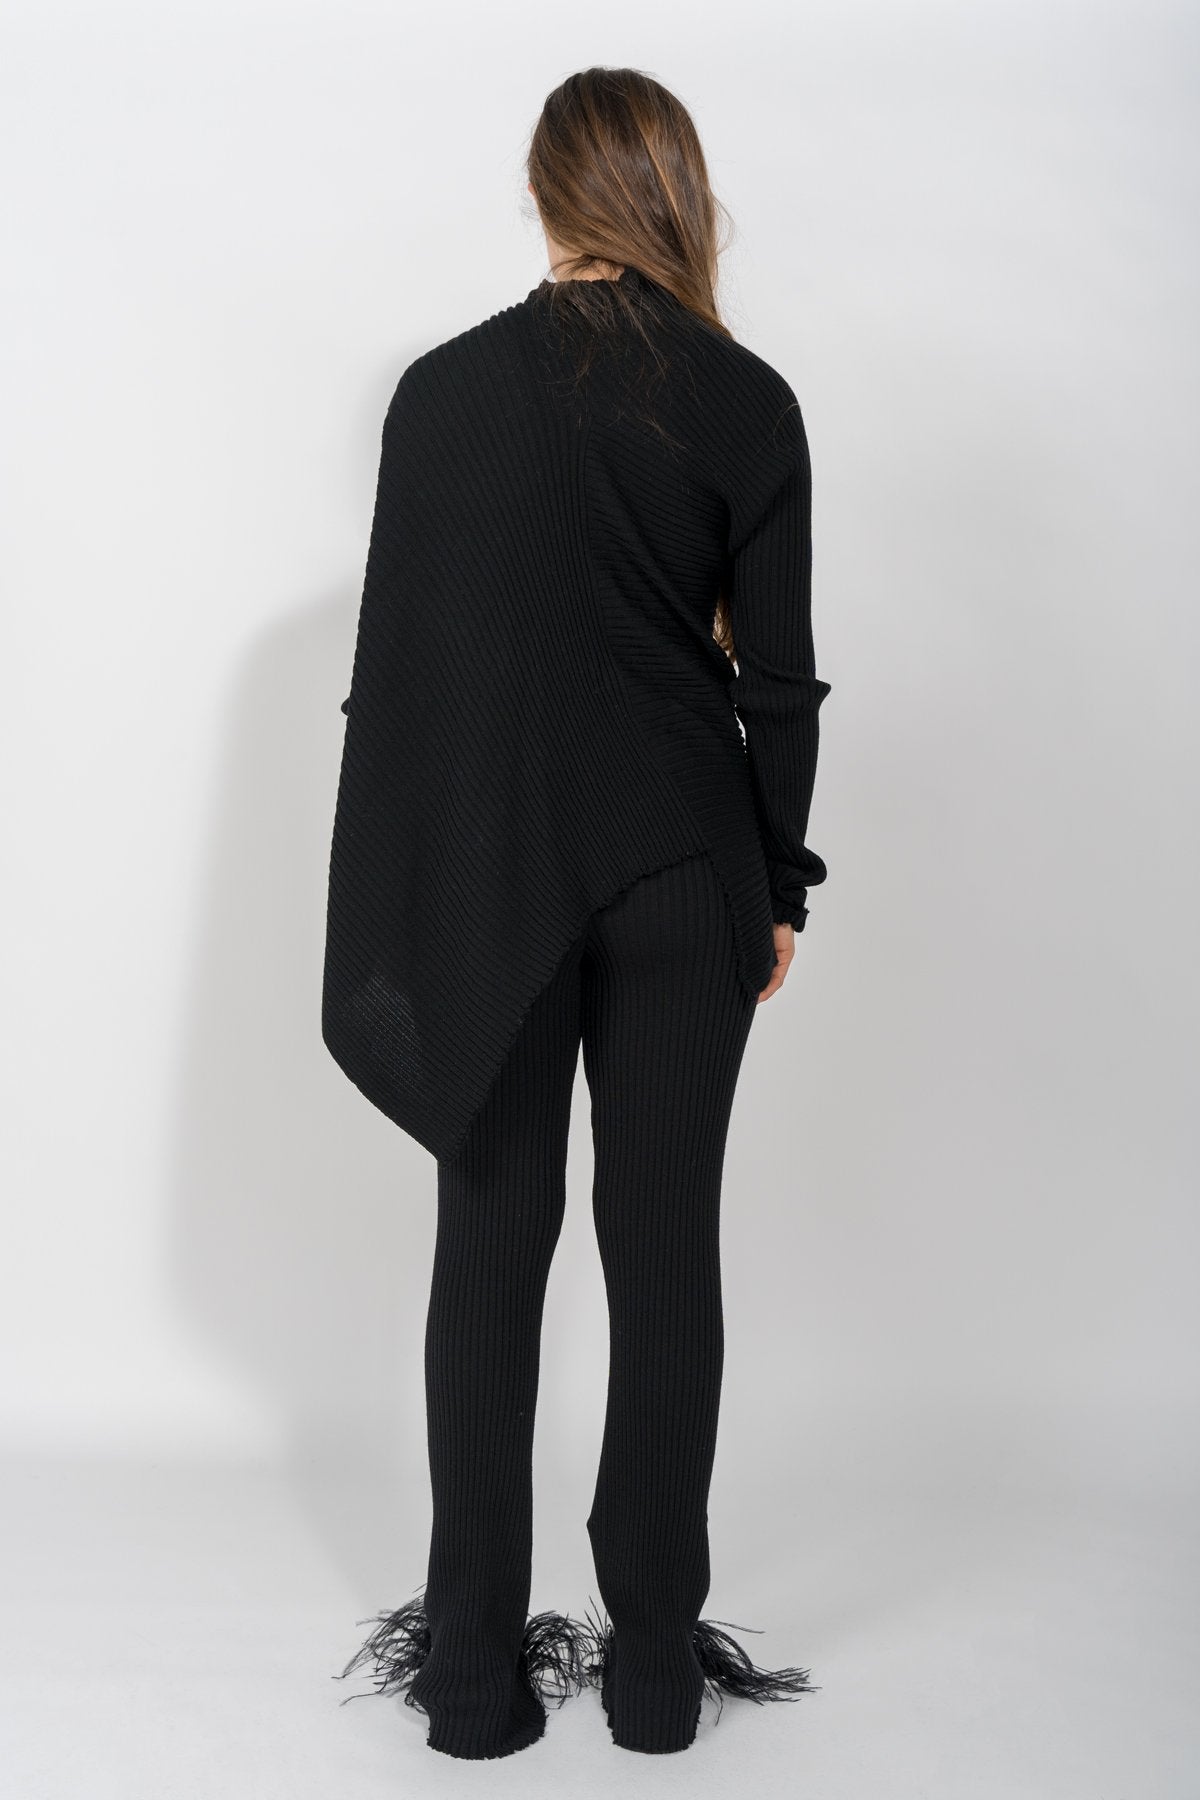 BLACK KNITTED TROUSERS MARQUES ALMEIDA.